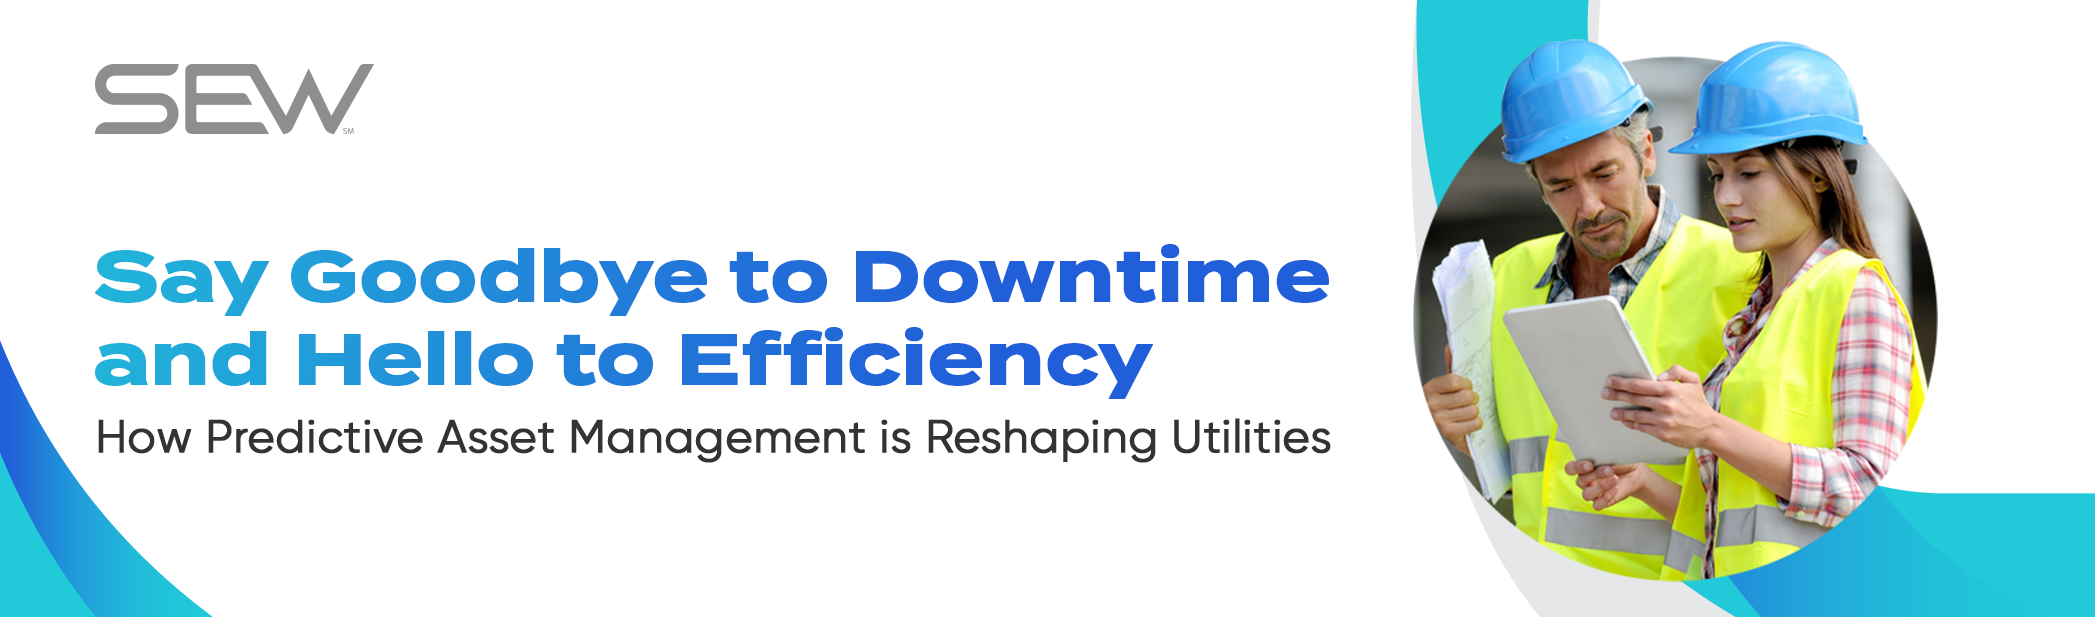 Say Goodbye to Downtime and Hello to Efficiency